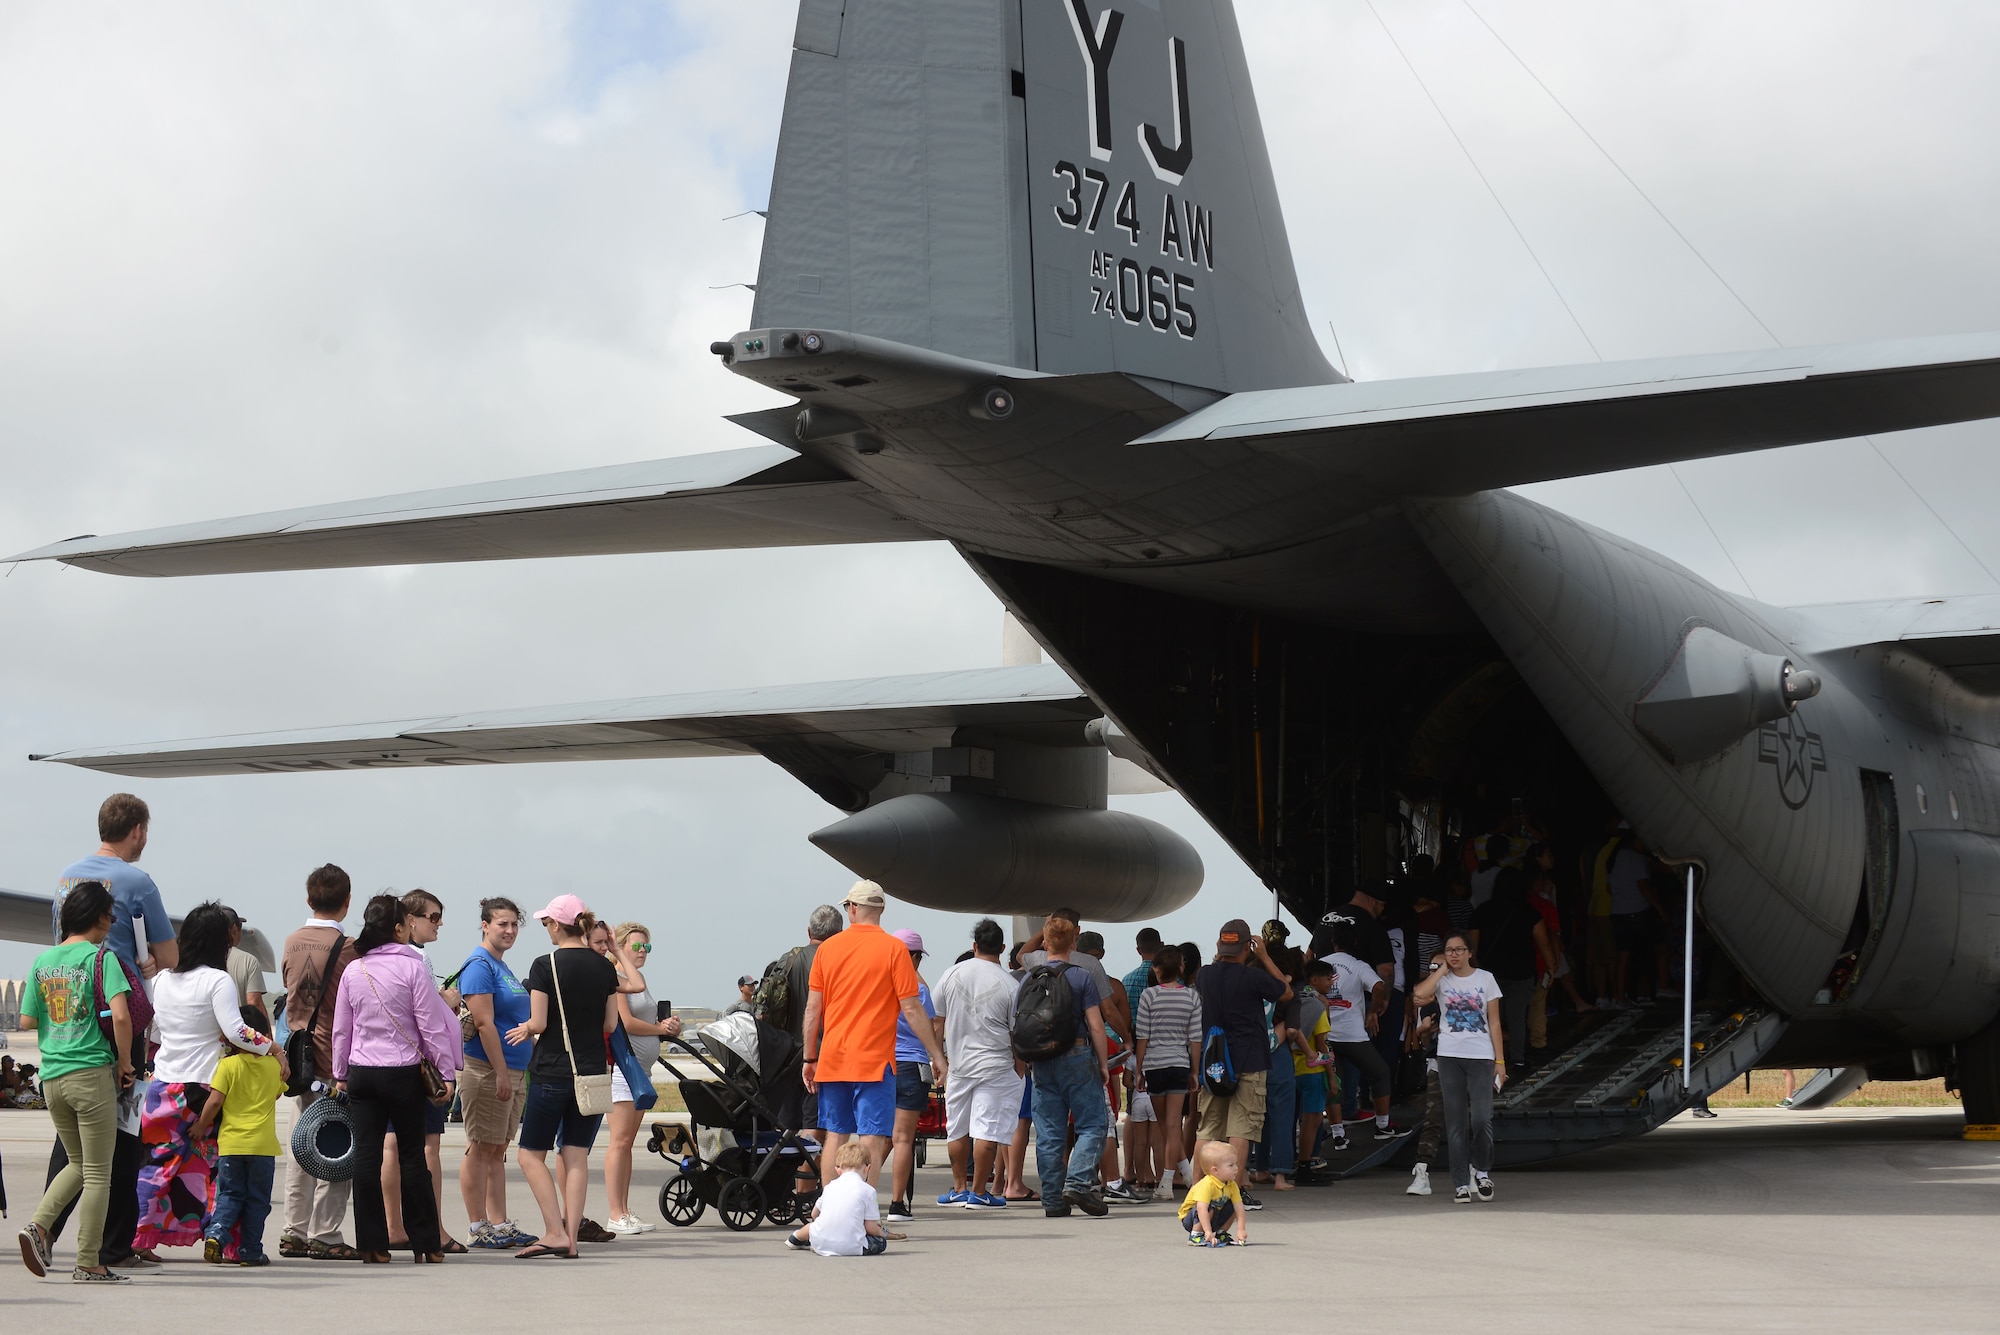 Crowds of people line up to see a C-130 Hercules Feb. 20 during the 2016 Pacific Air Partners Open House at Andersen Air Force Base, Guam. The event included multiple aircraft static displays, flyovers, ground demonstrations and live bands.(U.S. Air Force photo/Airman 1st Class Arielle Vasquez)